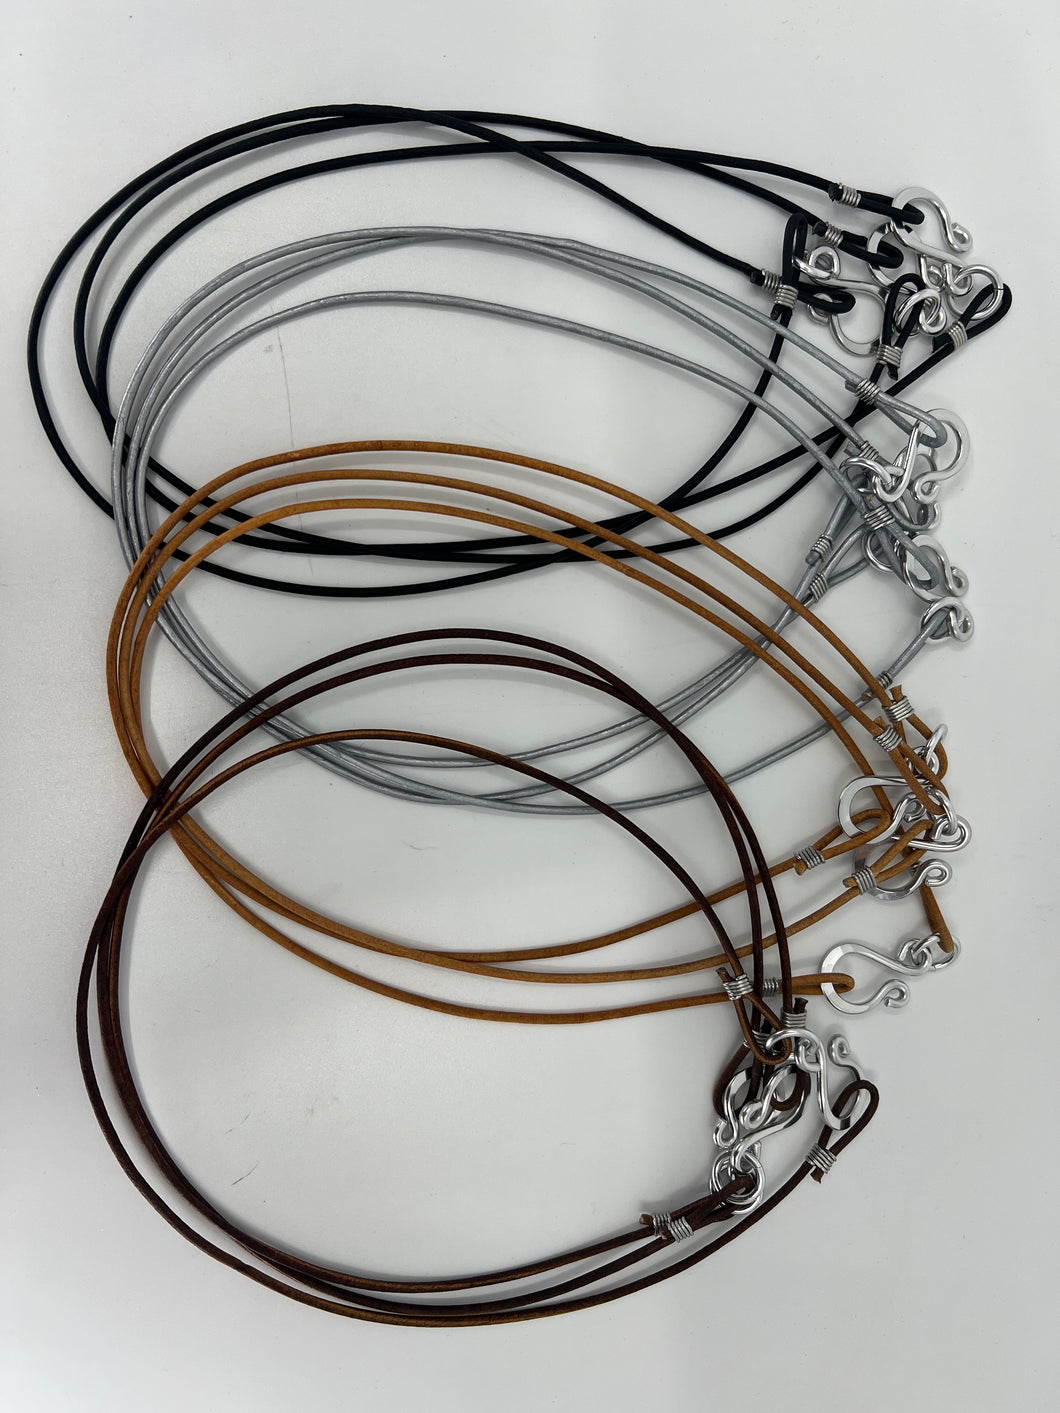 Leather & Metal Cords